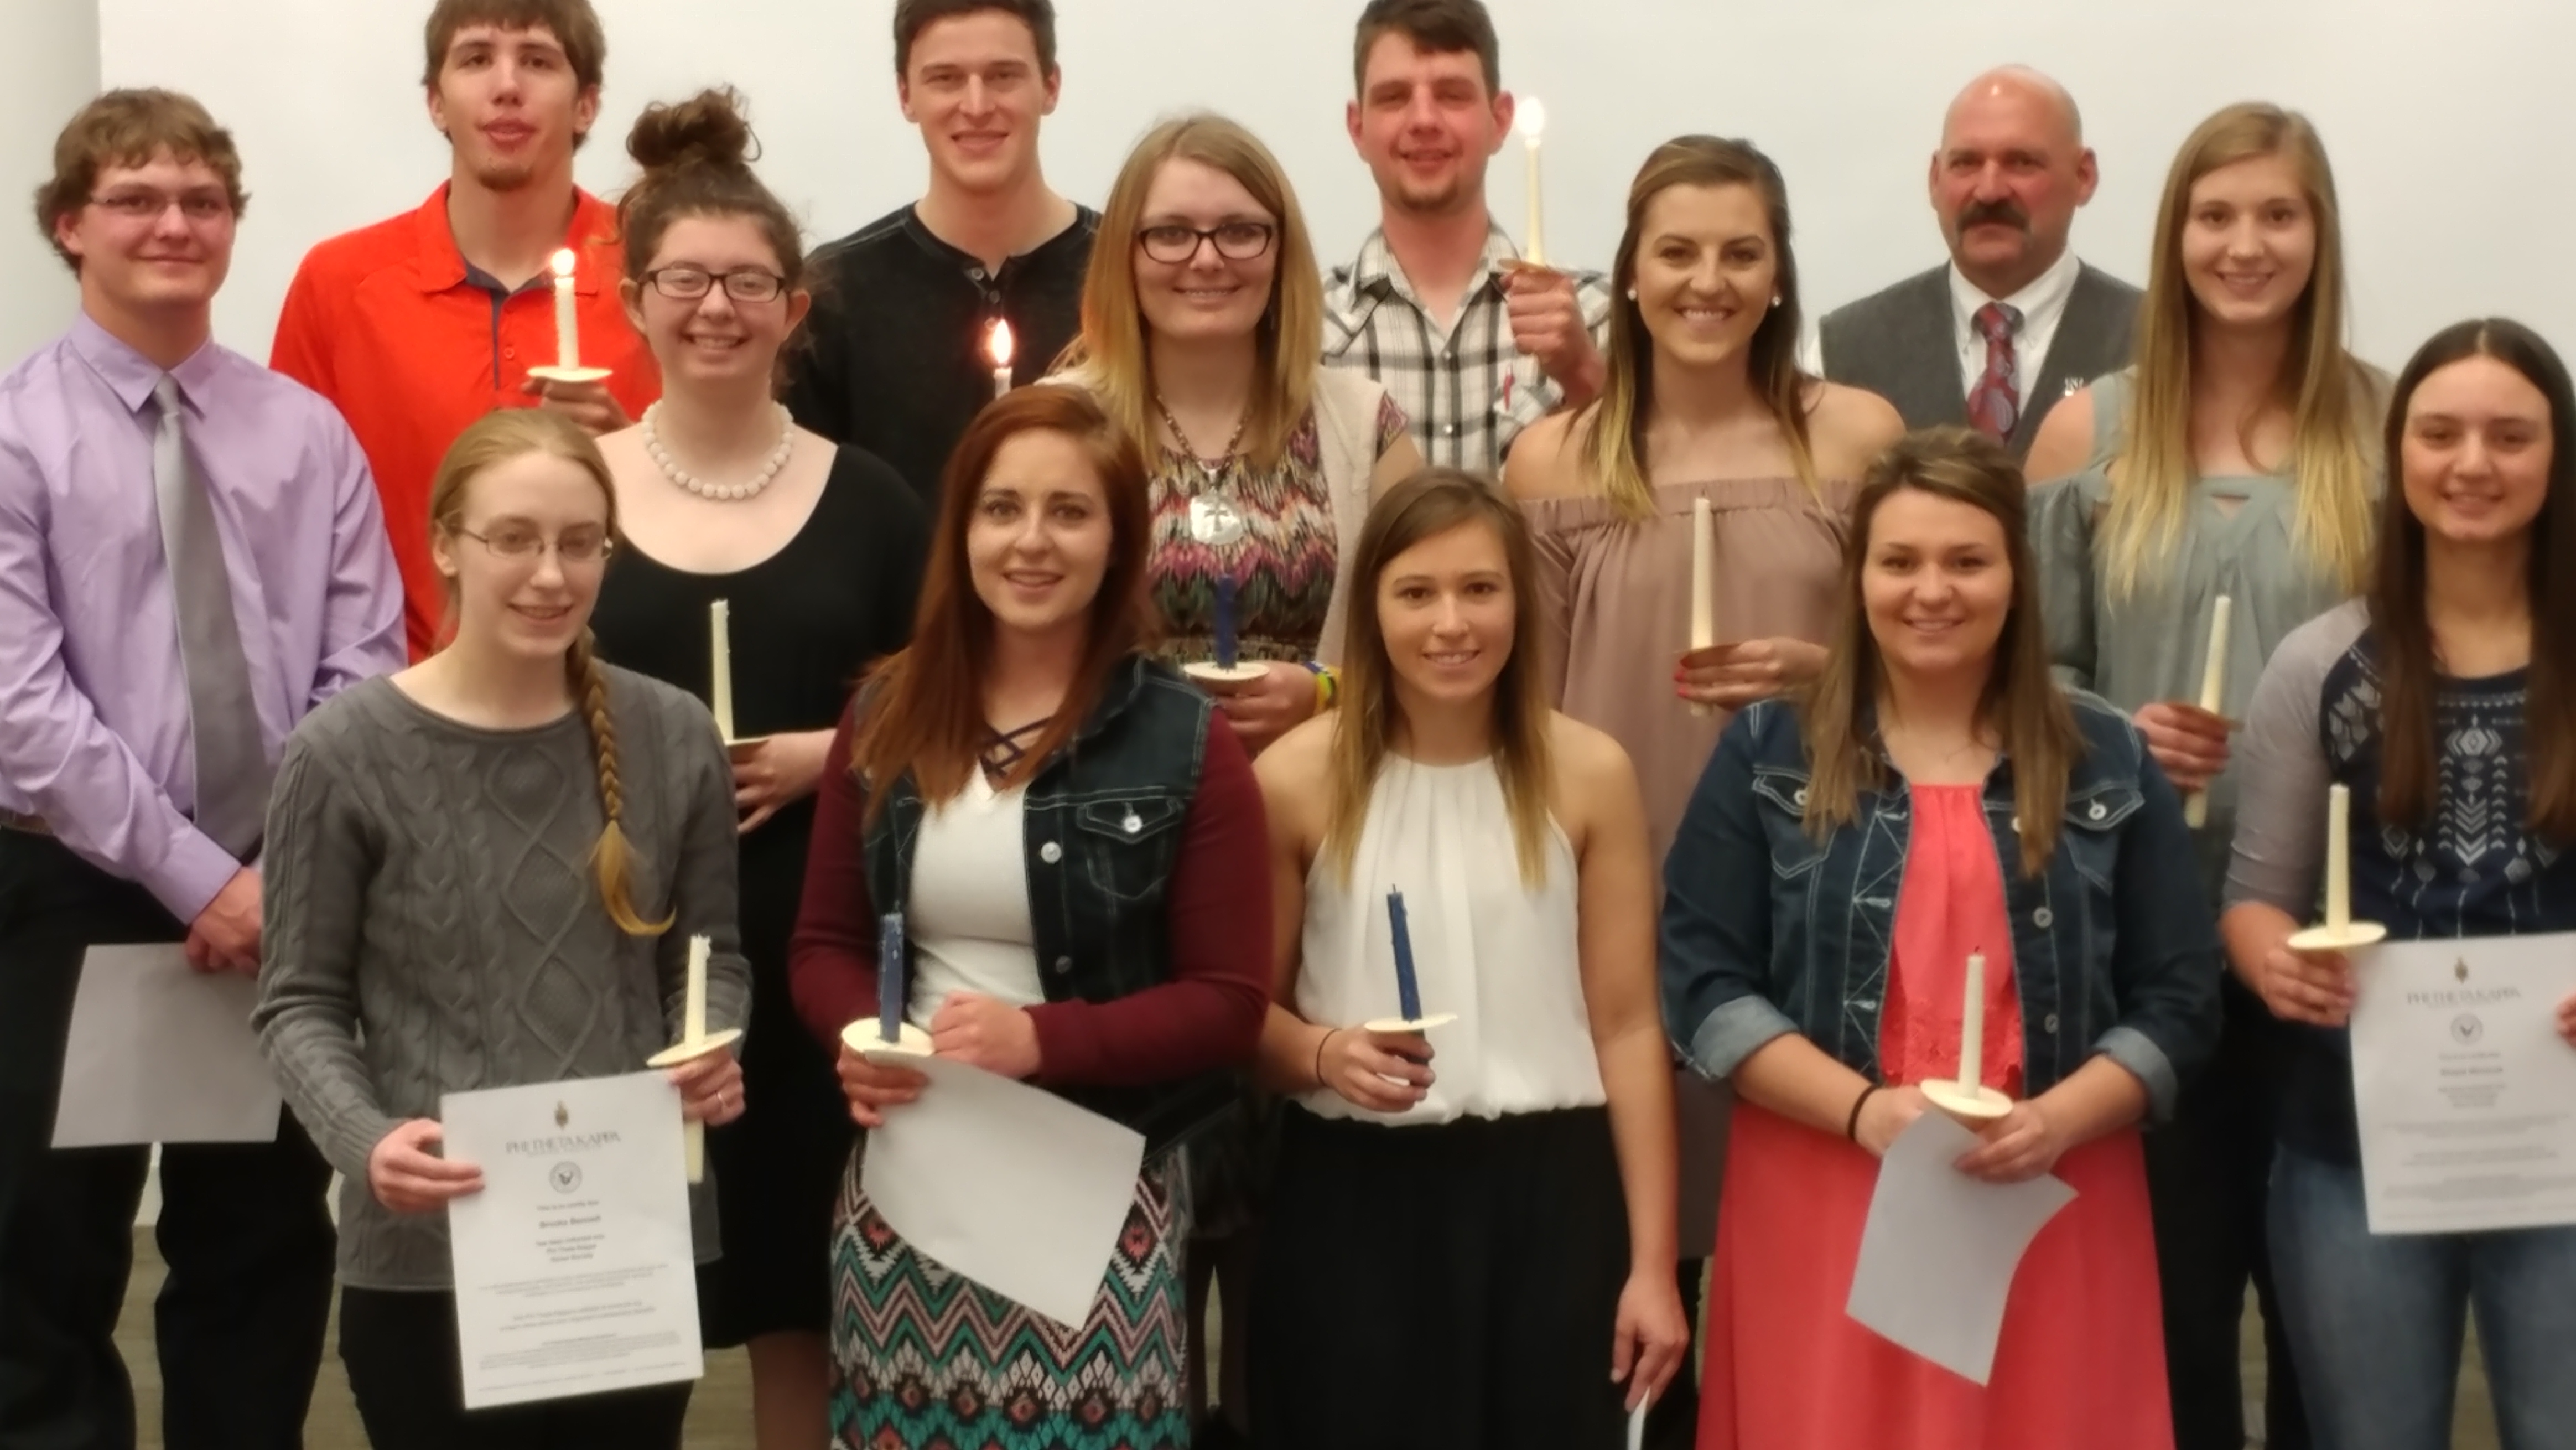 NCTA students installed in PTK are, front row, Brooke Bennett, Sadie Christensen, Colbey Luebbe, Paige Twohig, and Shayla Woracek. Middle row, Peyton McCord, Dorothy Fulton, Bridget Jackson, Baleigh Miller, and Kendra Marxsen. Third row, Lee Jespersen, Jesse Orr, Trevin Likens and Scott Smith. (Mary Crawford/NCTA Photo)